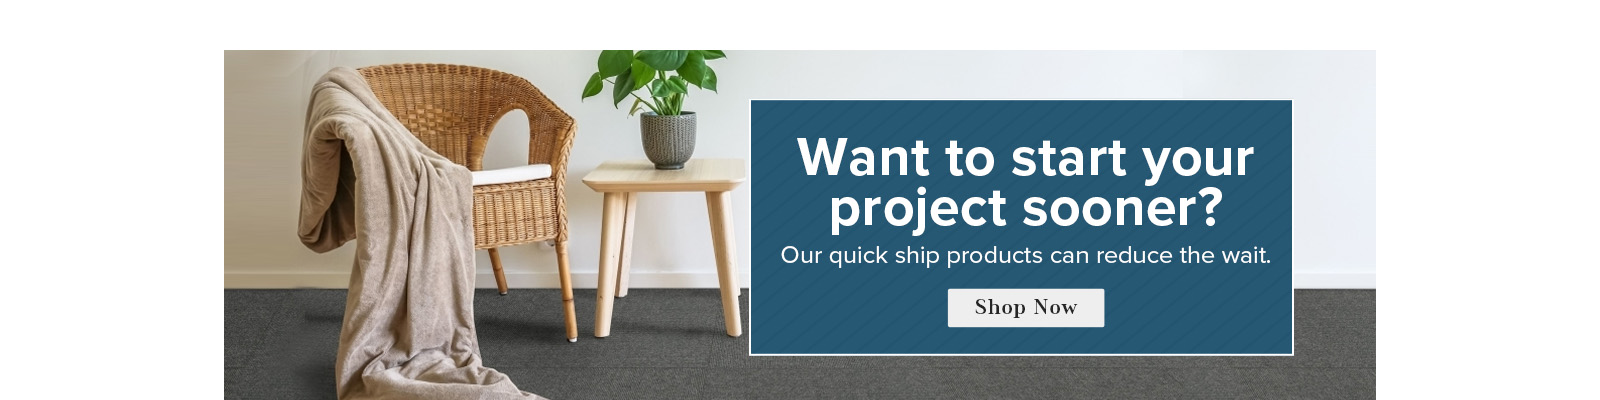 Want to start your project sooner question makr. Our quick ship products can reduce the wait. Shop Now